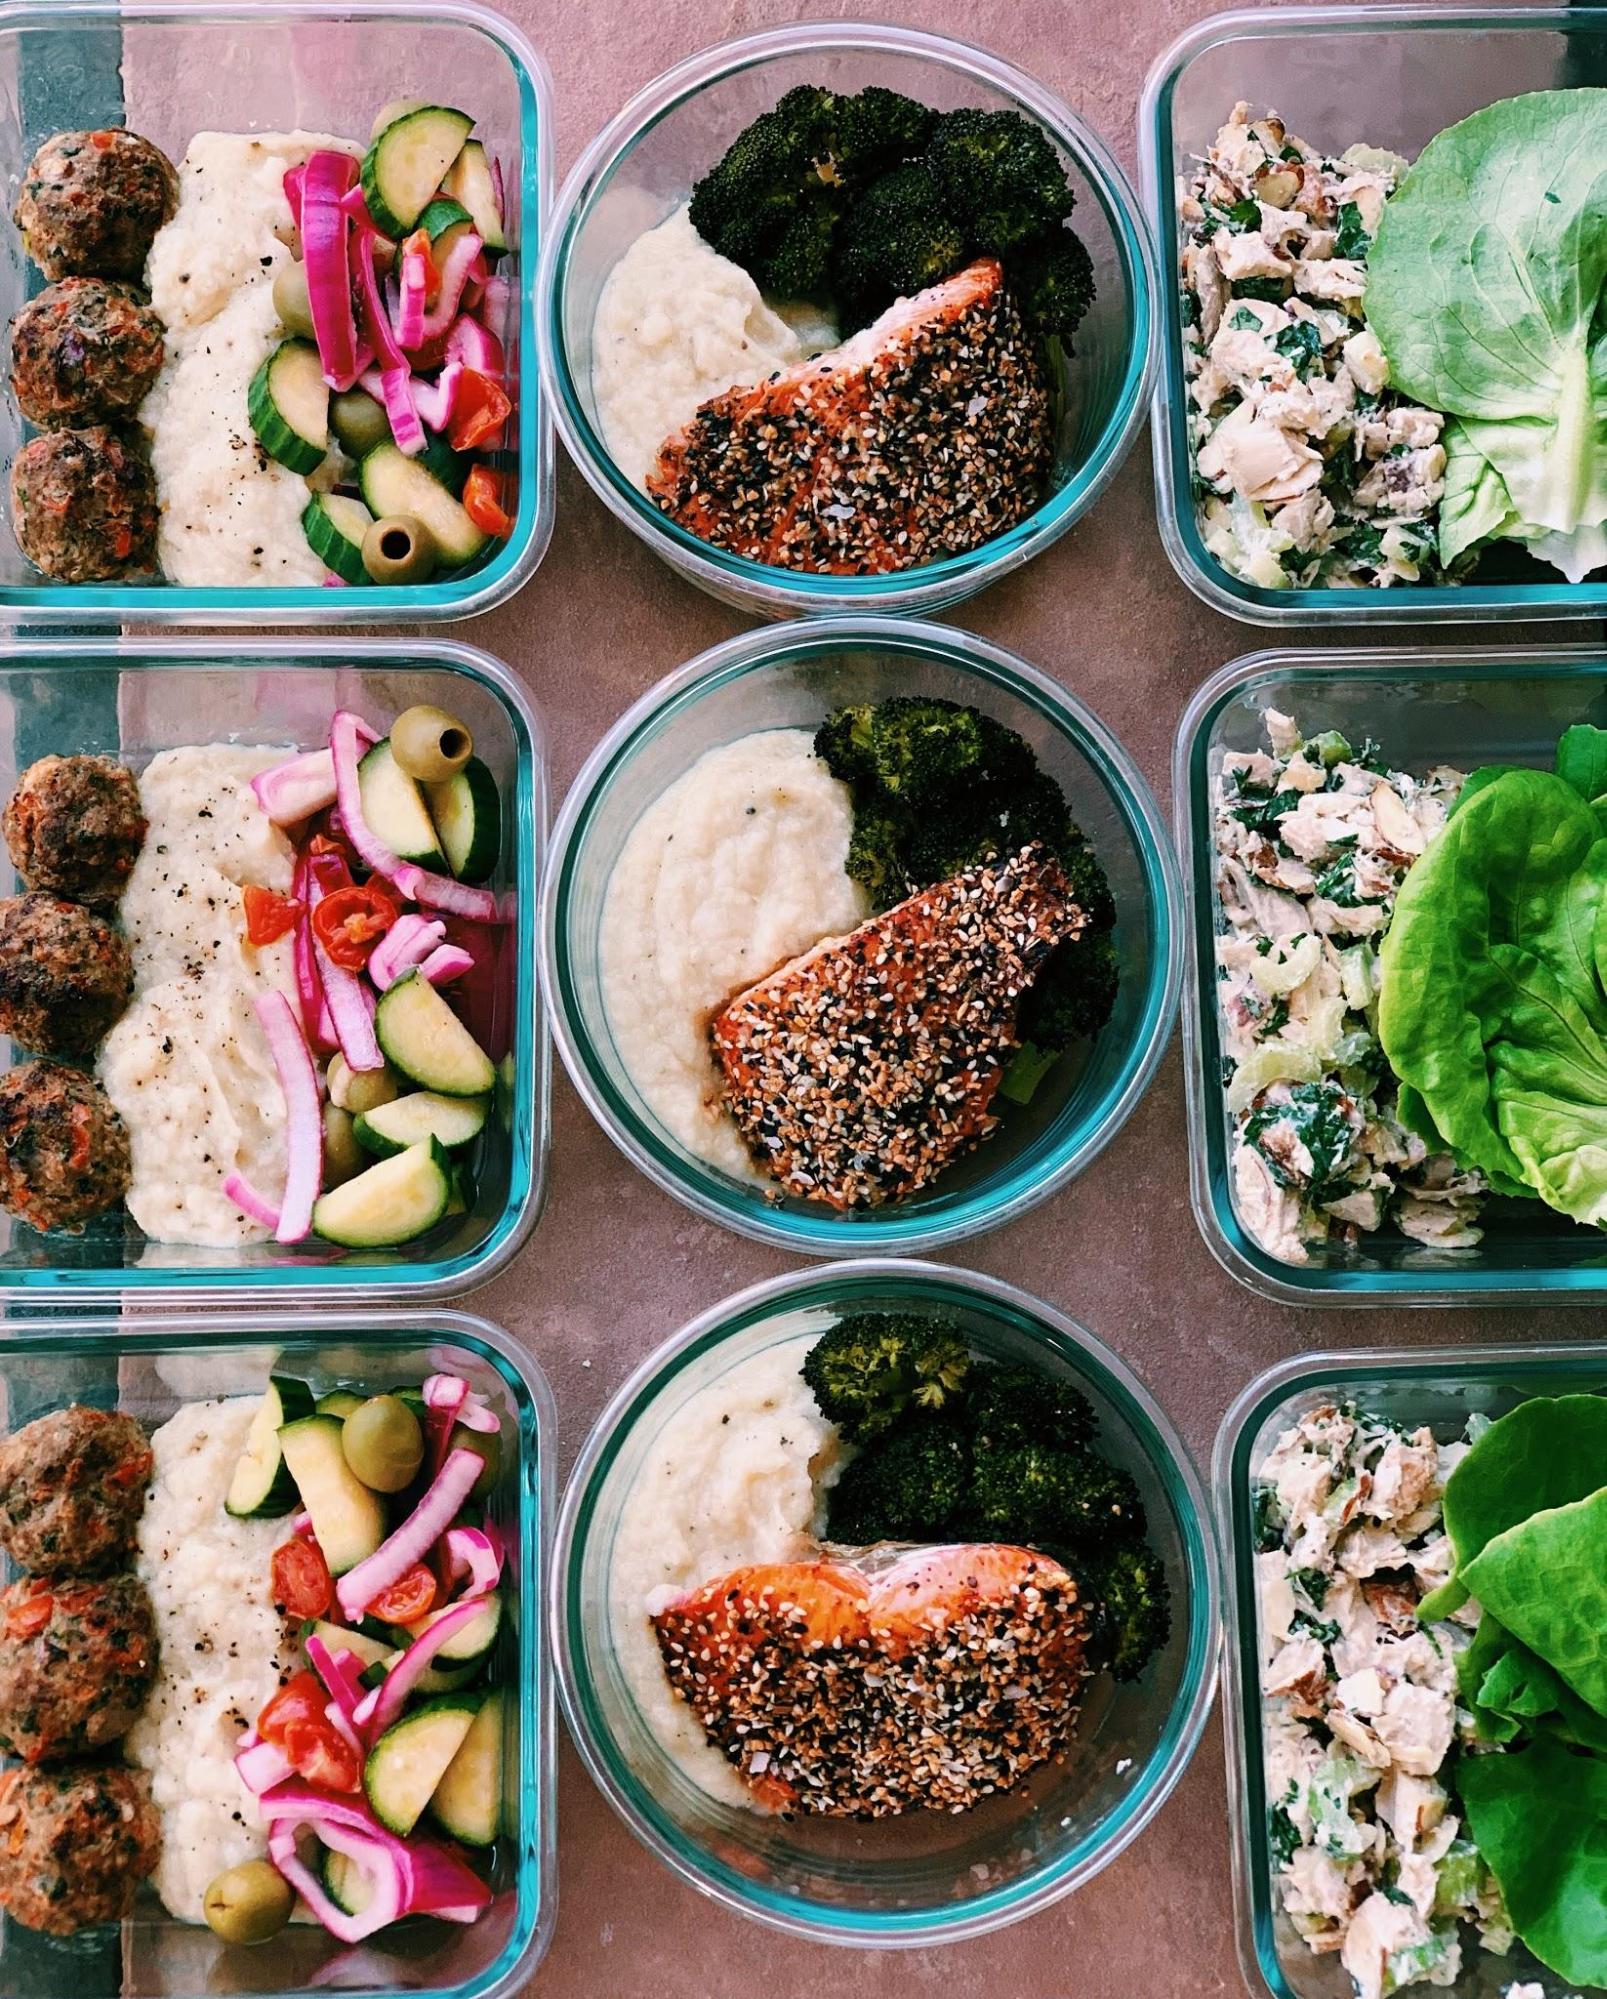 How to meal prep lunches for those on the go - Melissa's Healthy Kitchen